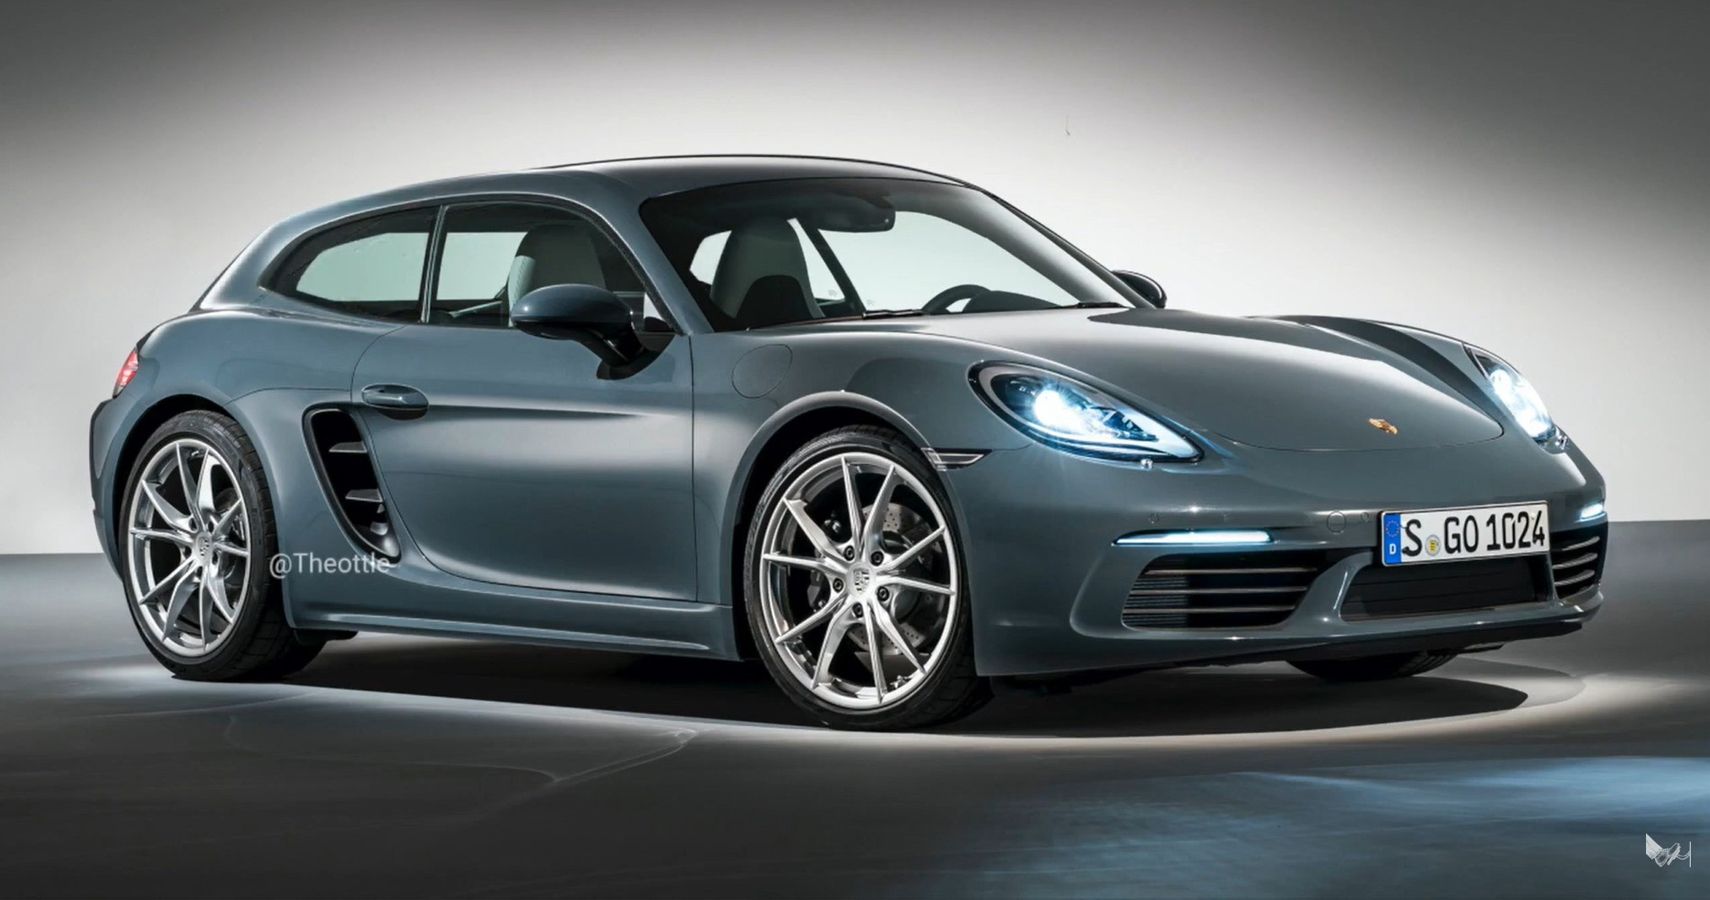 Artist Illustrates How a Porsche Cayman Would Appear as a Shooting Brake